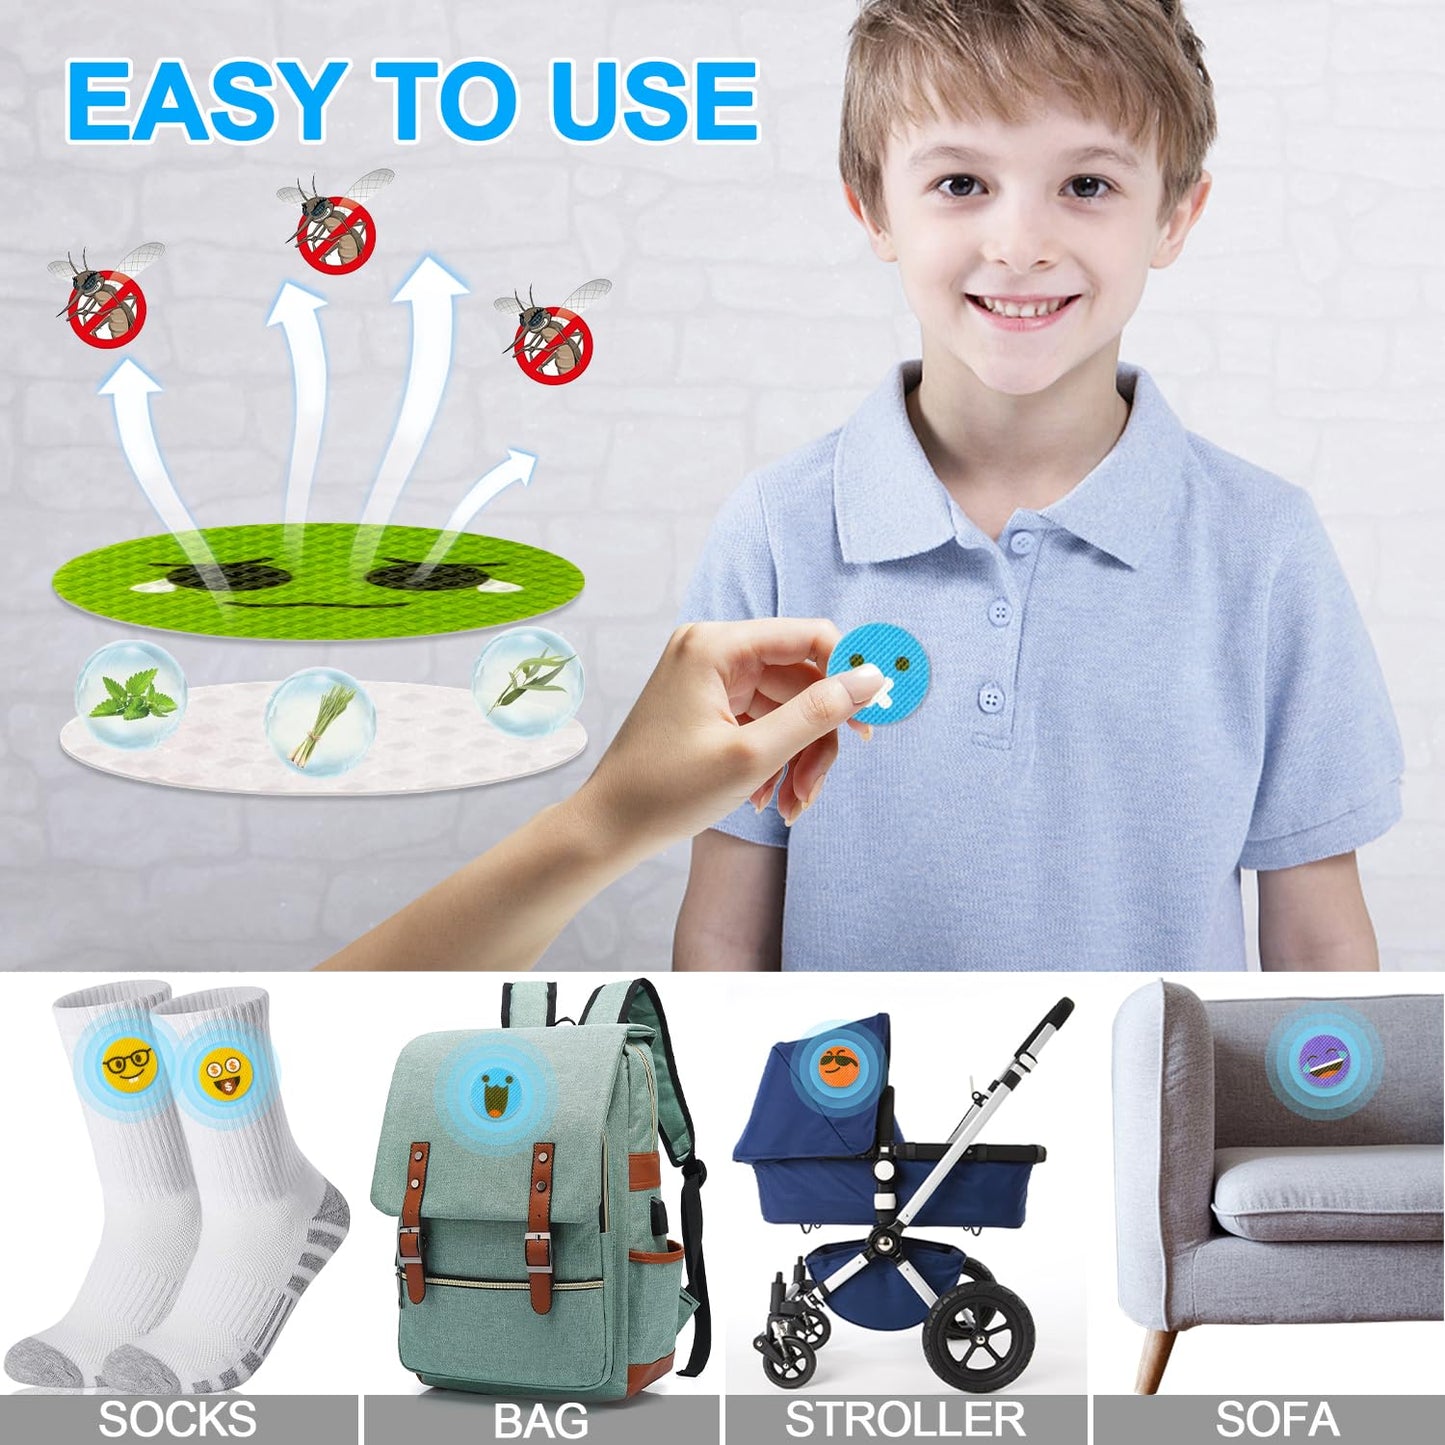 30 Pcs Mosquito Repellent Stickers, Funny Mosquito Patches for Kids Babies Adults with 10 Pack Individually Wrapped Mosquito Repellent Bracelets, DEET Free Mosquito Bands for Indoor Outdoor